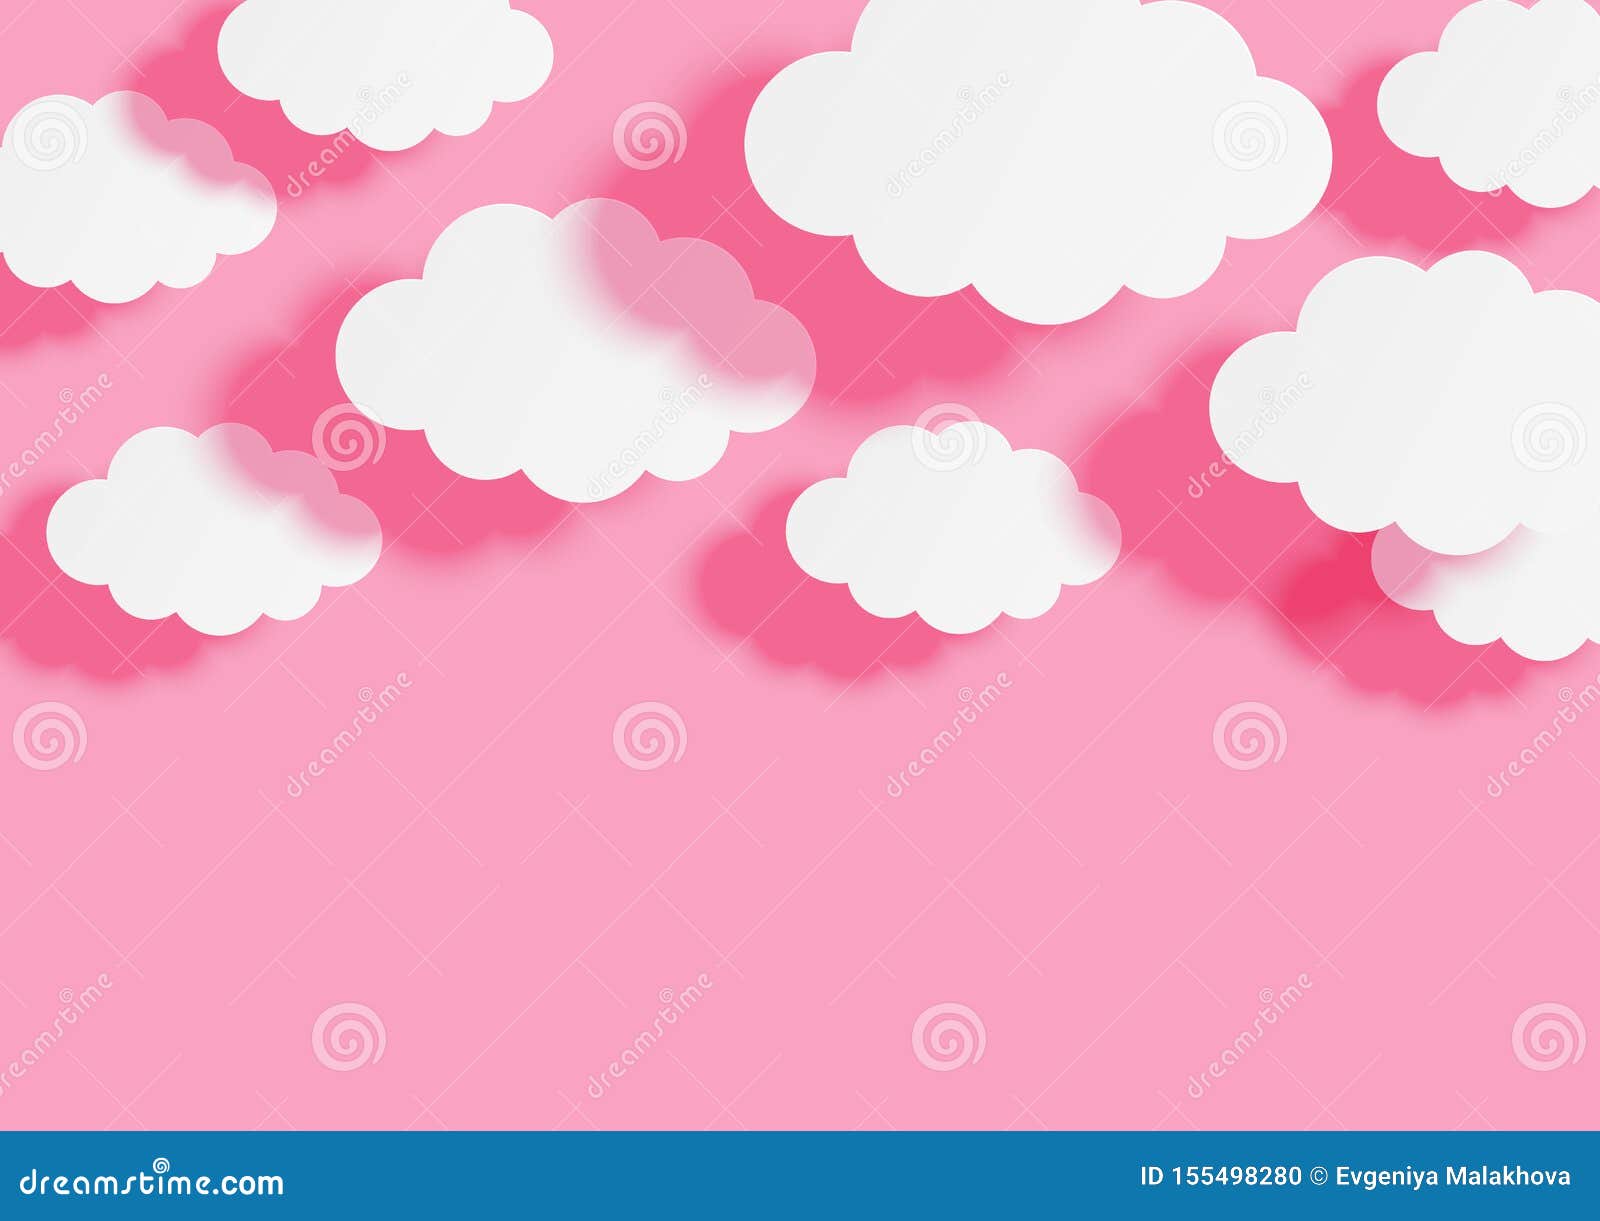 Pink Background With Clouds gambar ke 15